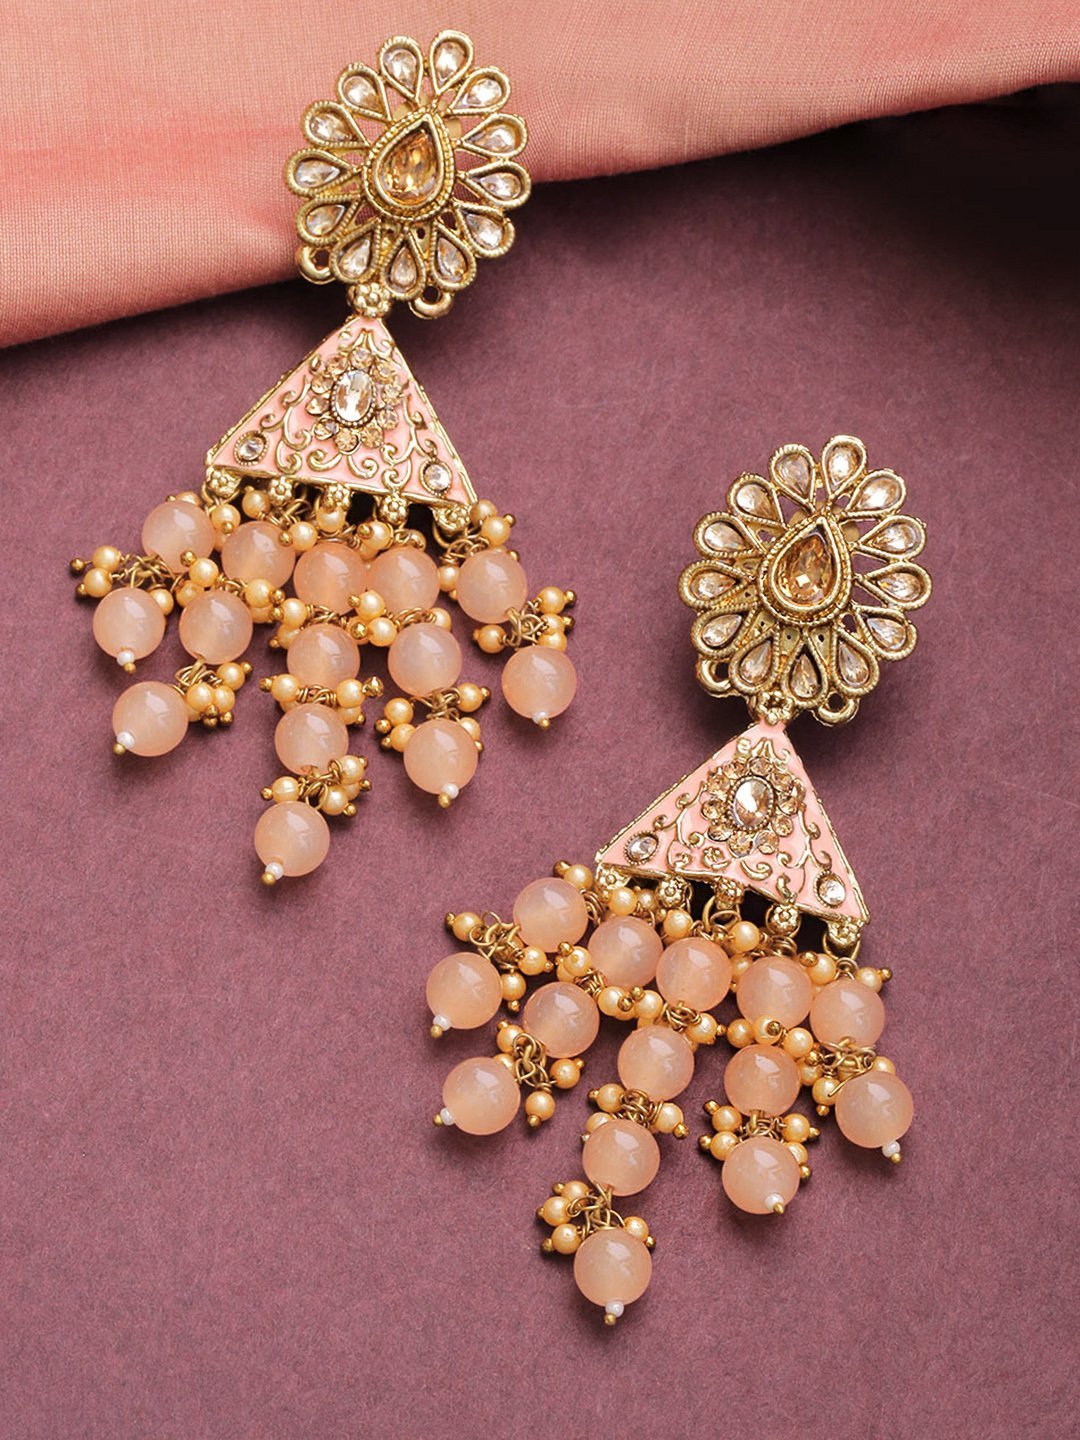 Women's Gold-Plated Stone Studded Floral Patterned Meenakari Earrings with Beads Drop in Peach Color - Priyaasi